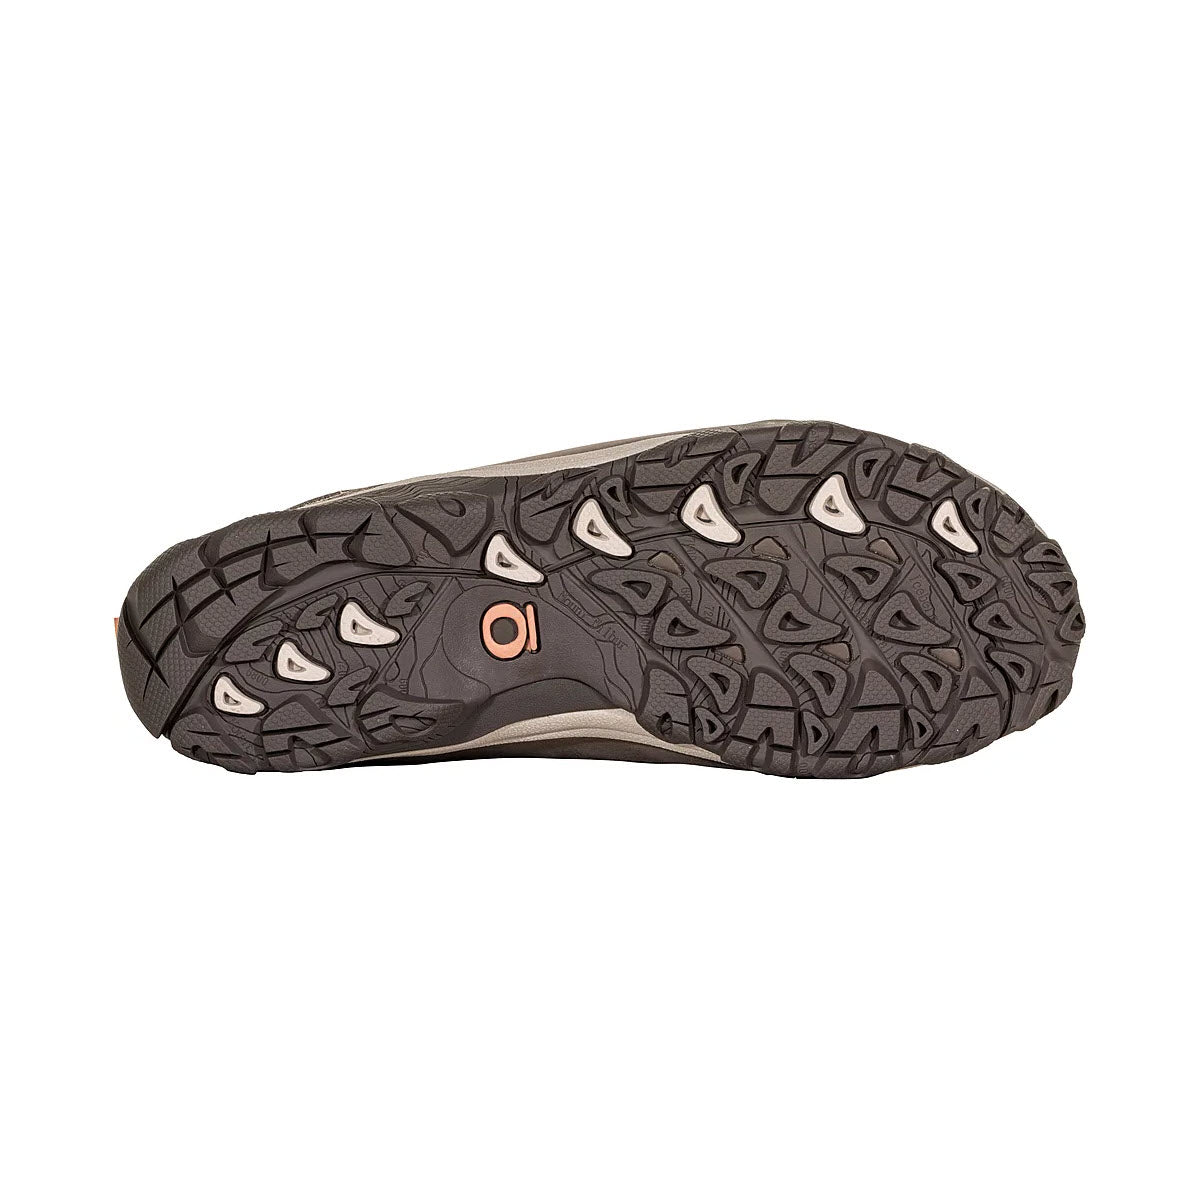 Sole of an Oboz Ousel Low B-Dry Port hiking shoe with a black tread pattern featuring triangular and geometric shapes, utilizing B-DRY waterproof technology, and an orange circular logo.